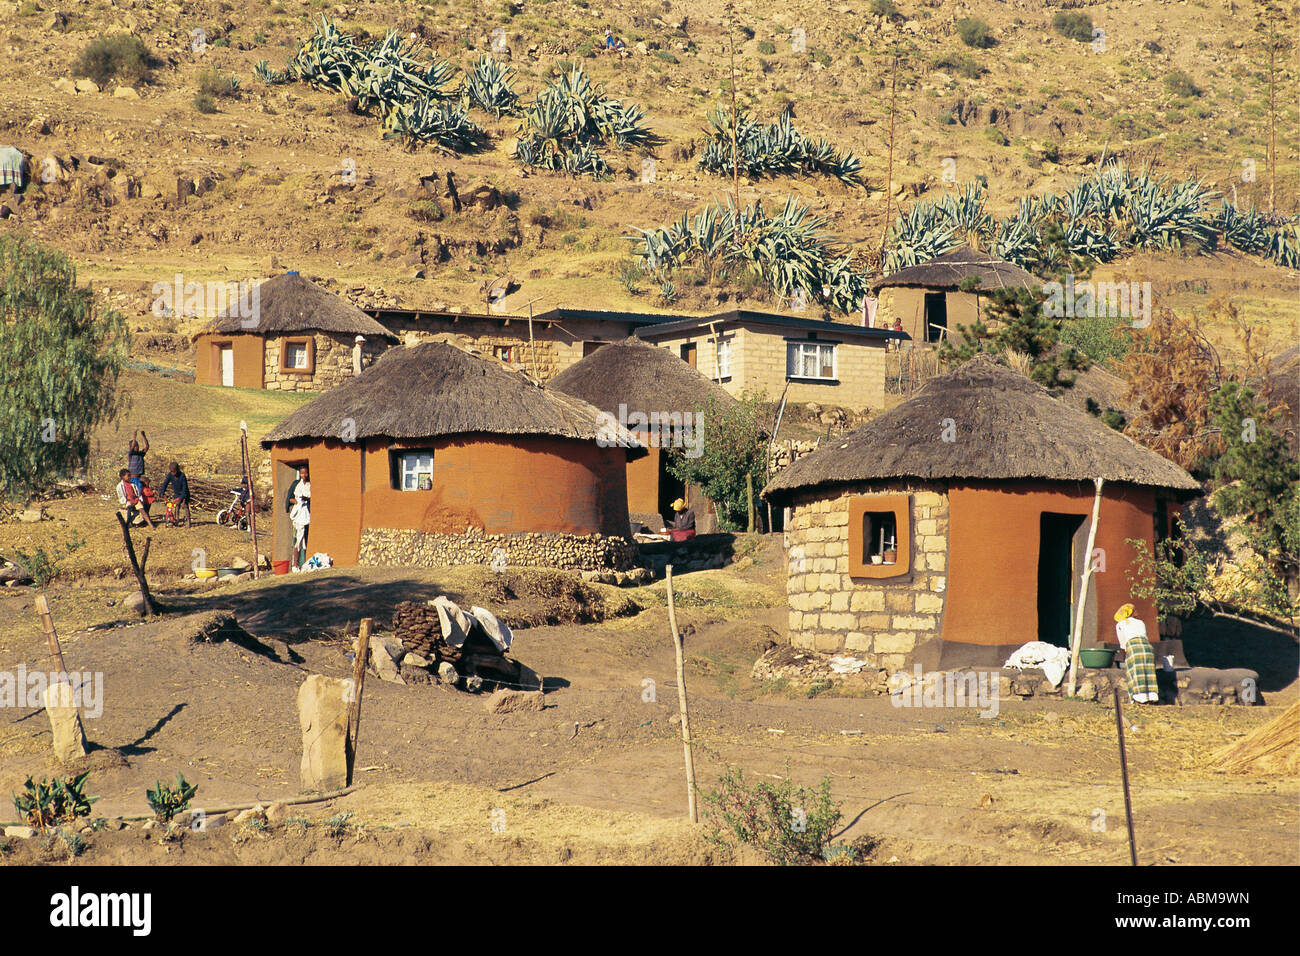 A S sutu village in Lesotho Africa Stock Photo